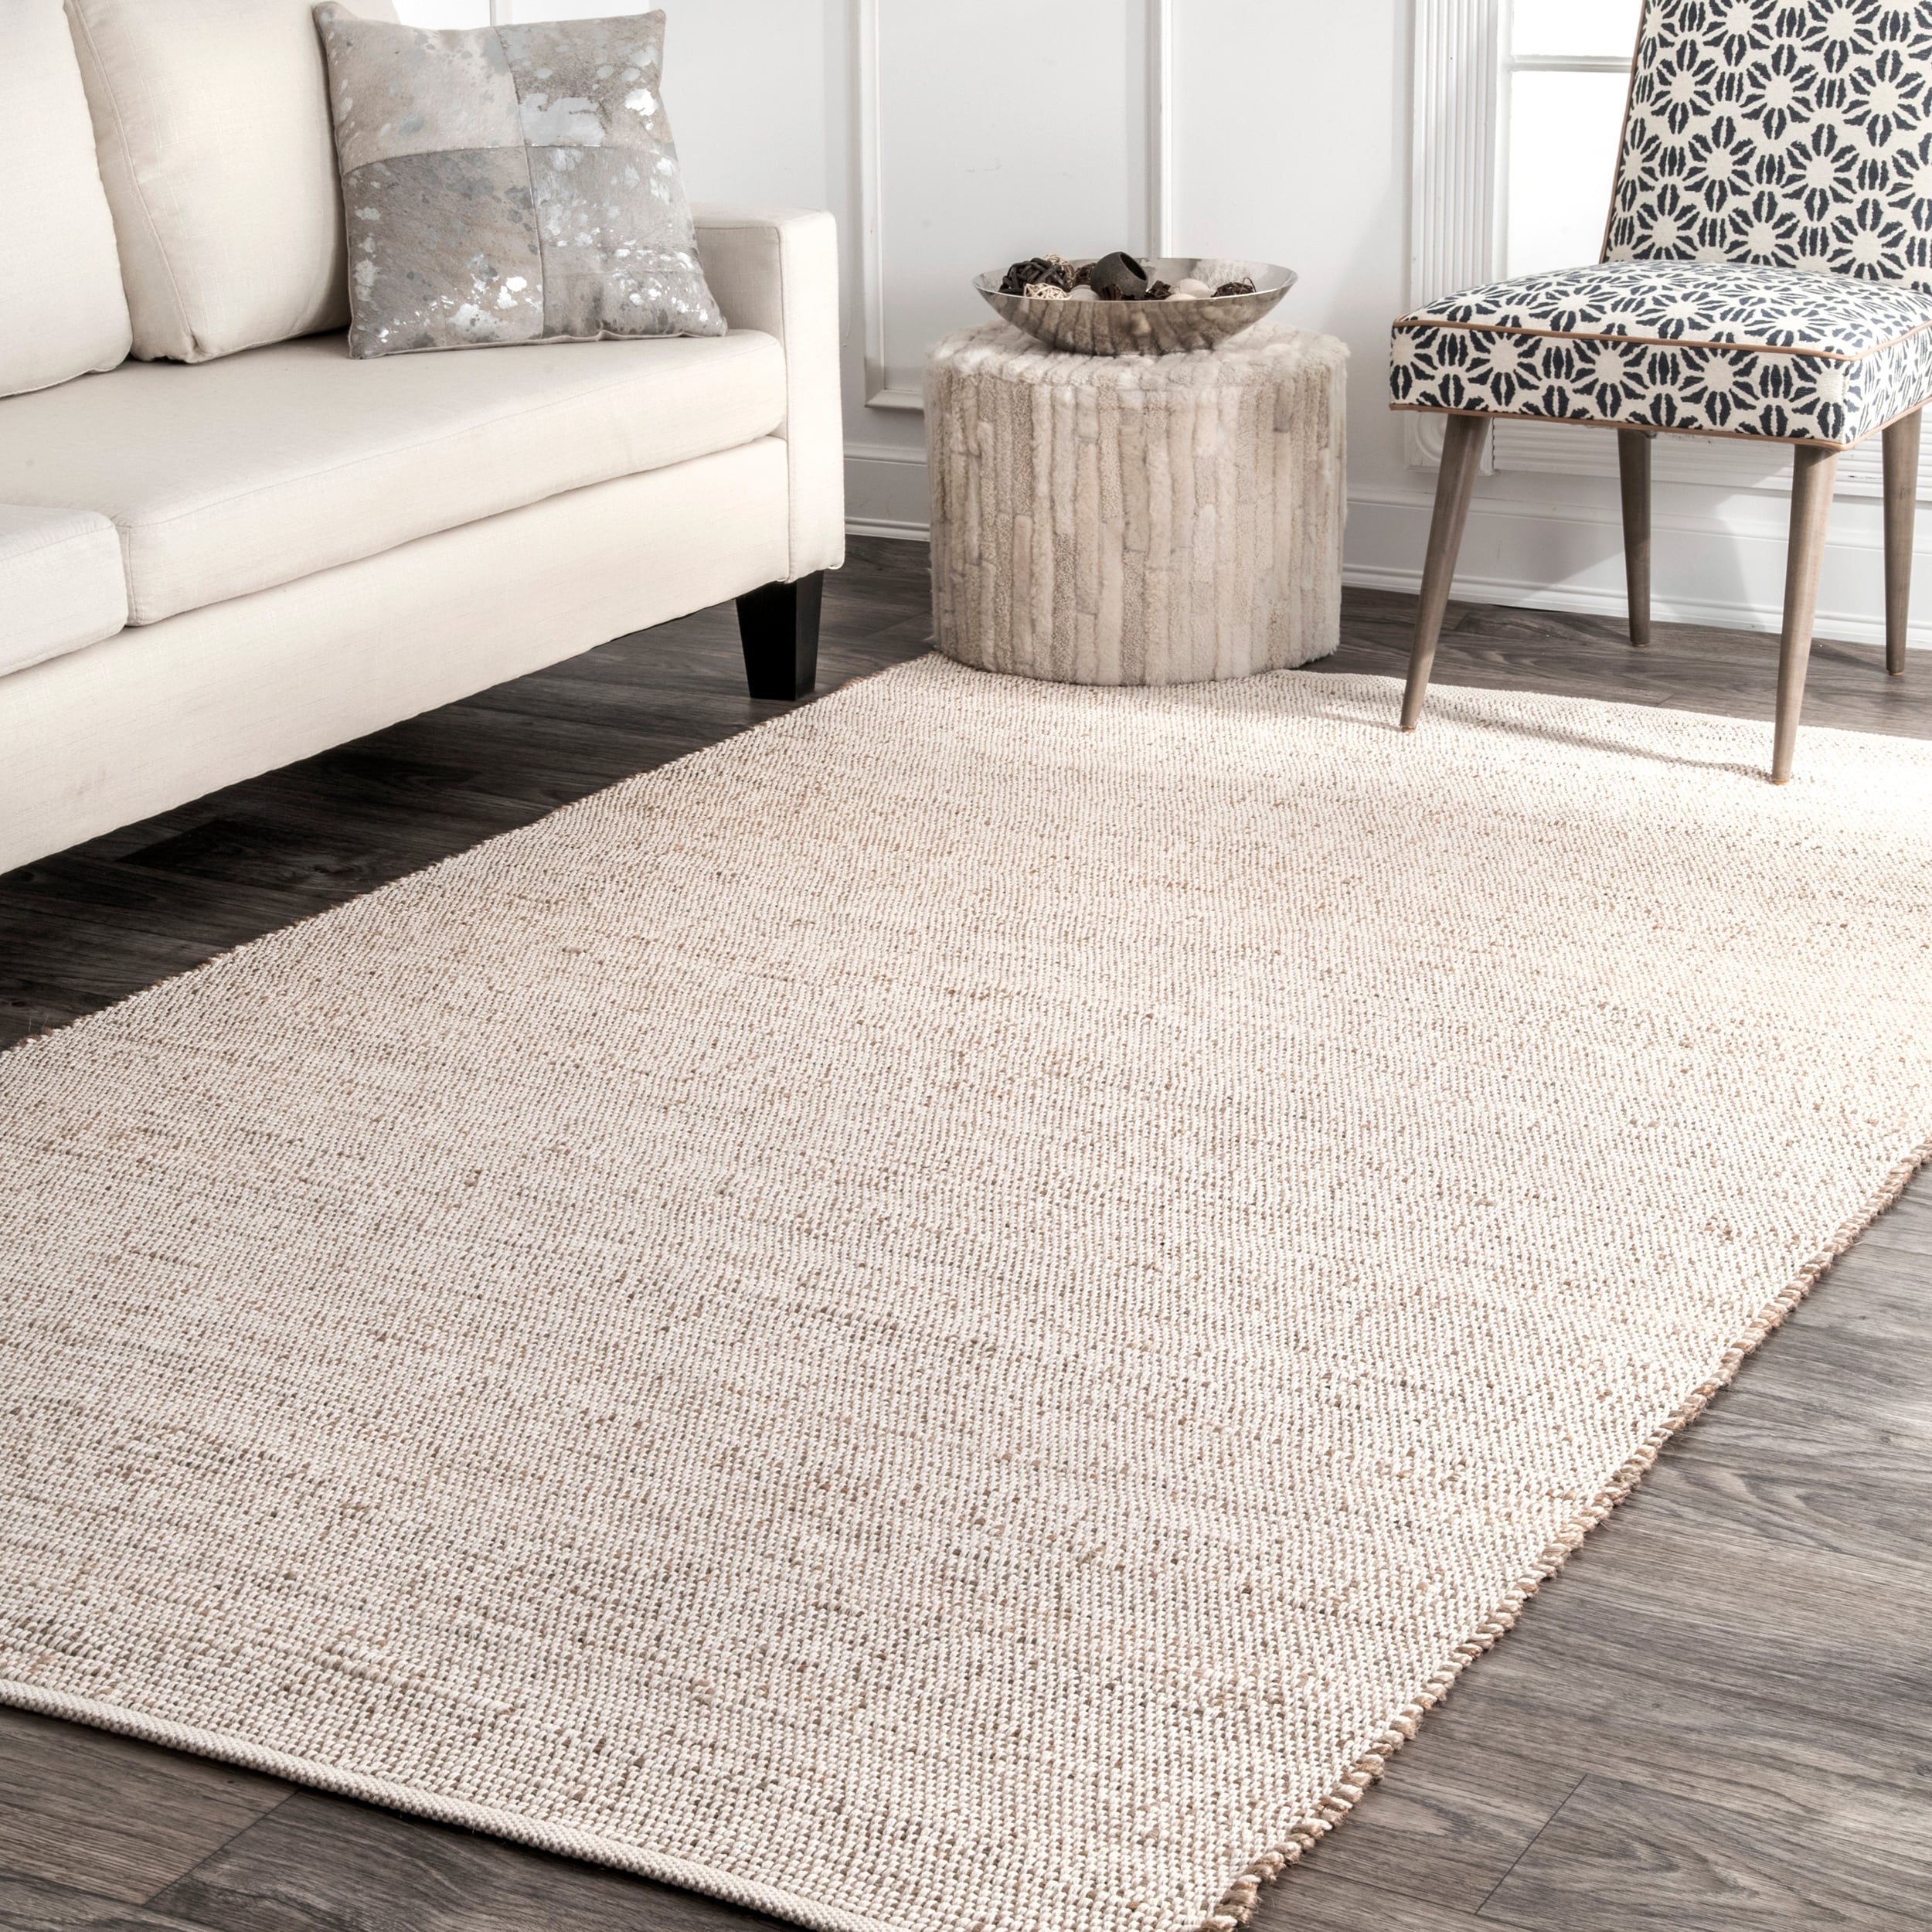 Hand Woven Gold Jute Rug 5' x 8' Feet Acura Rugs Natural Jute Collection Area Rug 60W x 96L